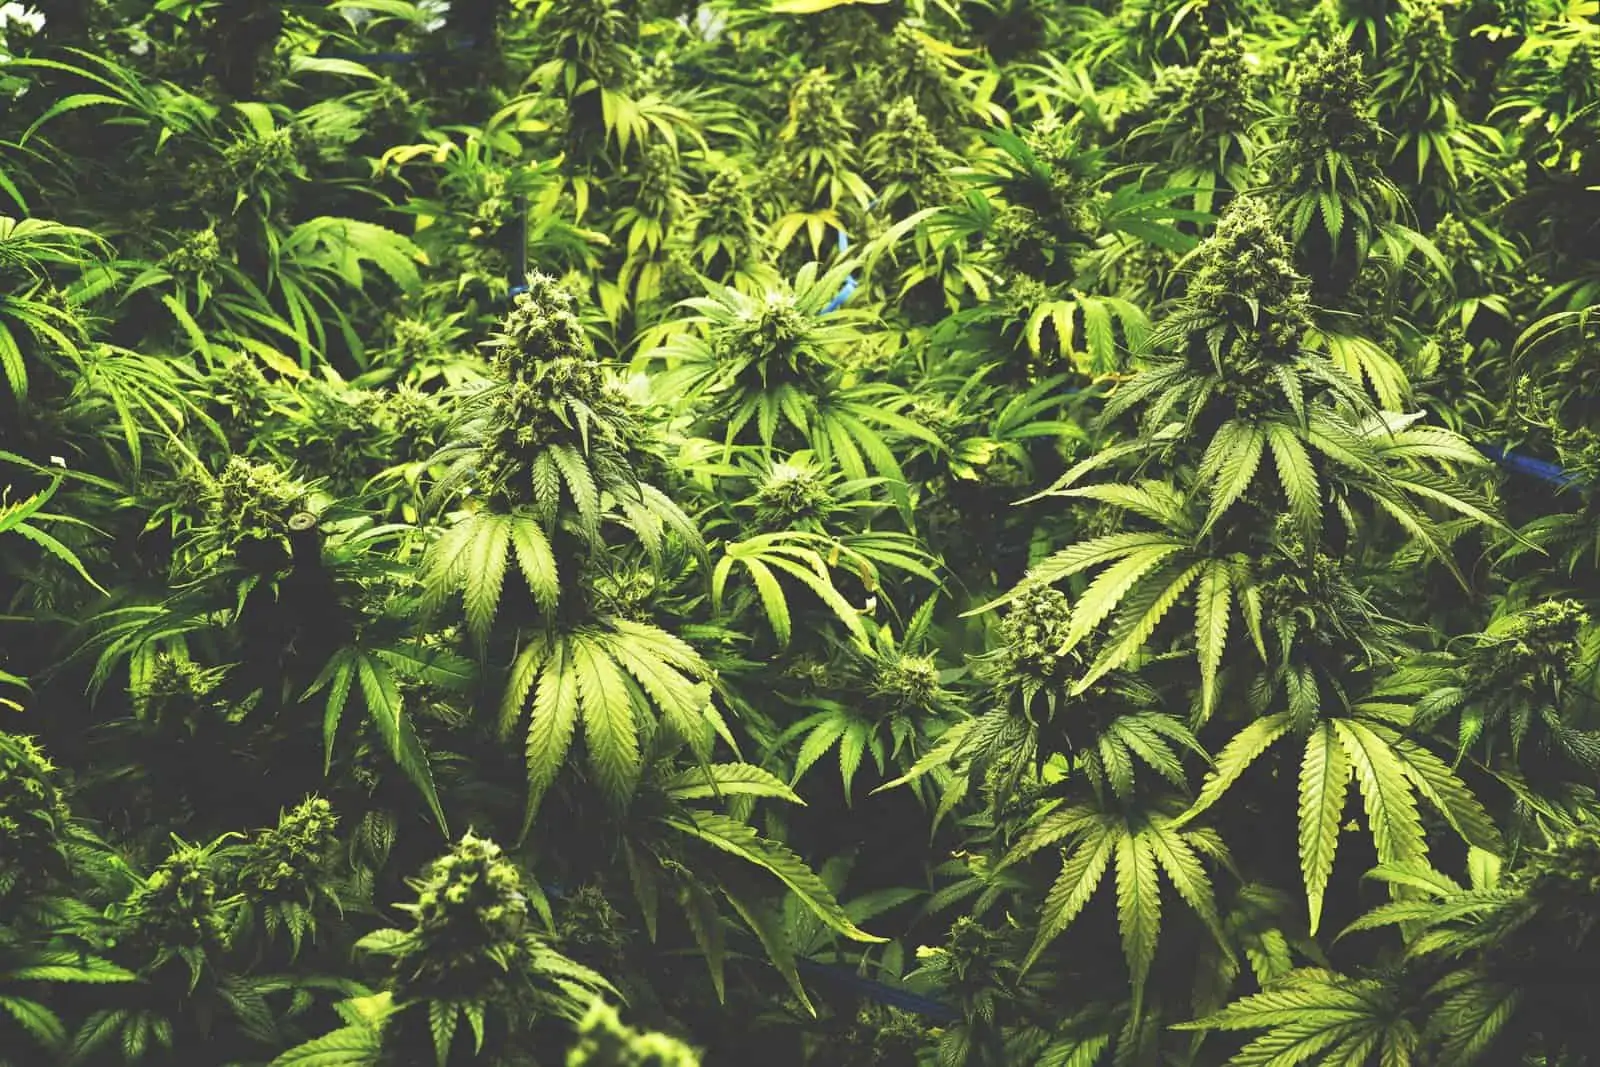 How To Grow Marijuana For Your Personal Use. Field of cannabis plants. 